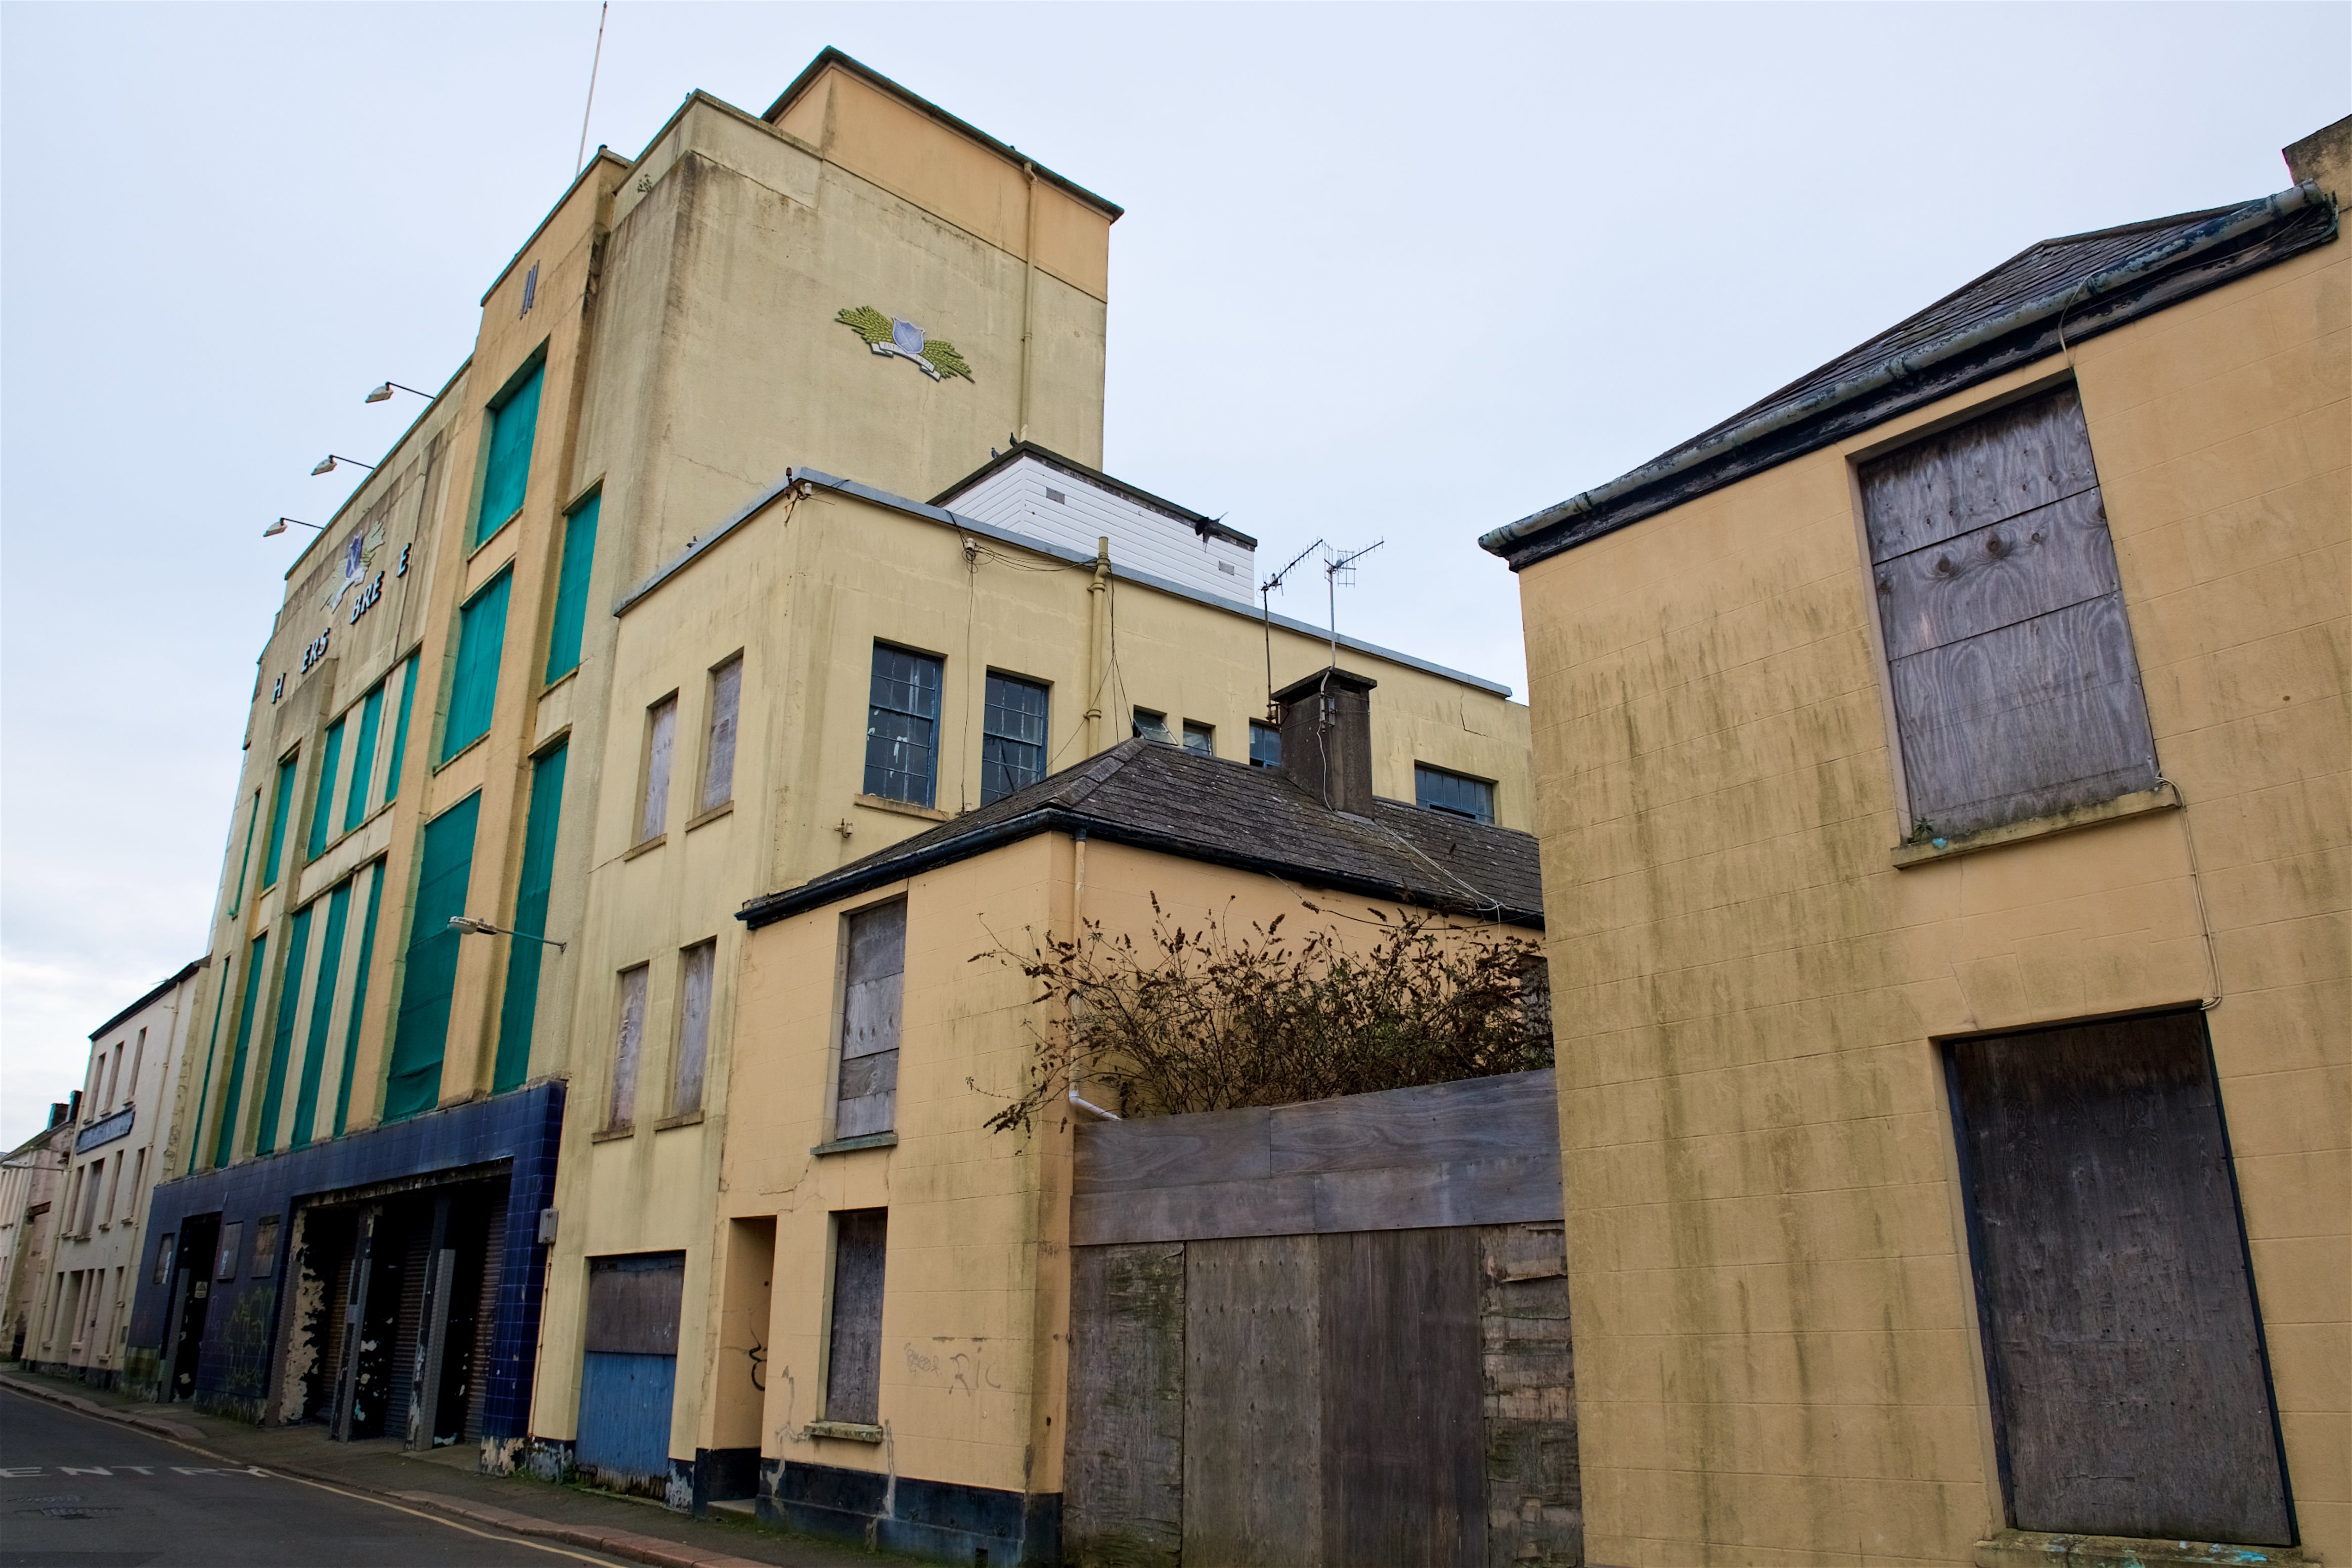 The former Ann Street Brewery building. Picture: ROB CURRIE. (30296395)